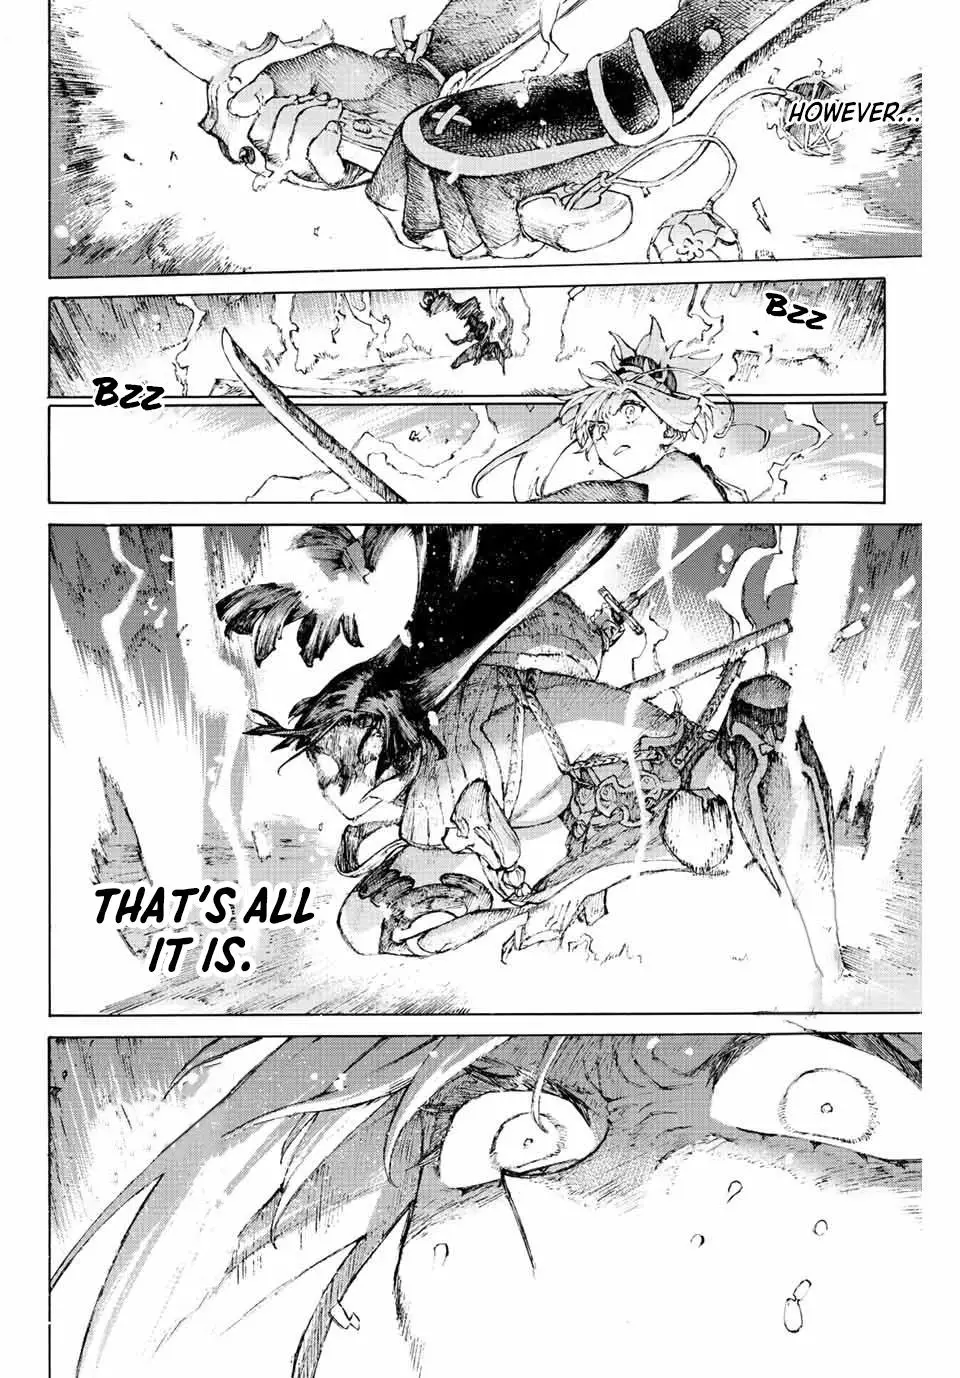 Fate/grand Order -Epic Of Remnant- Pseudo-Singularity Iii: The Stage Of Carnage, Shimousa - Seven Duels Of Swordmasters - 36 page 5-0087d7e4